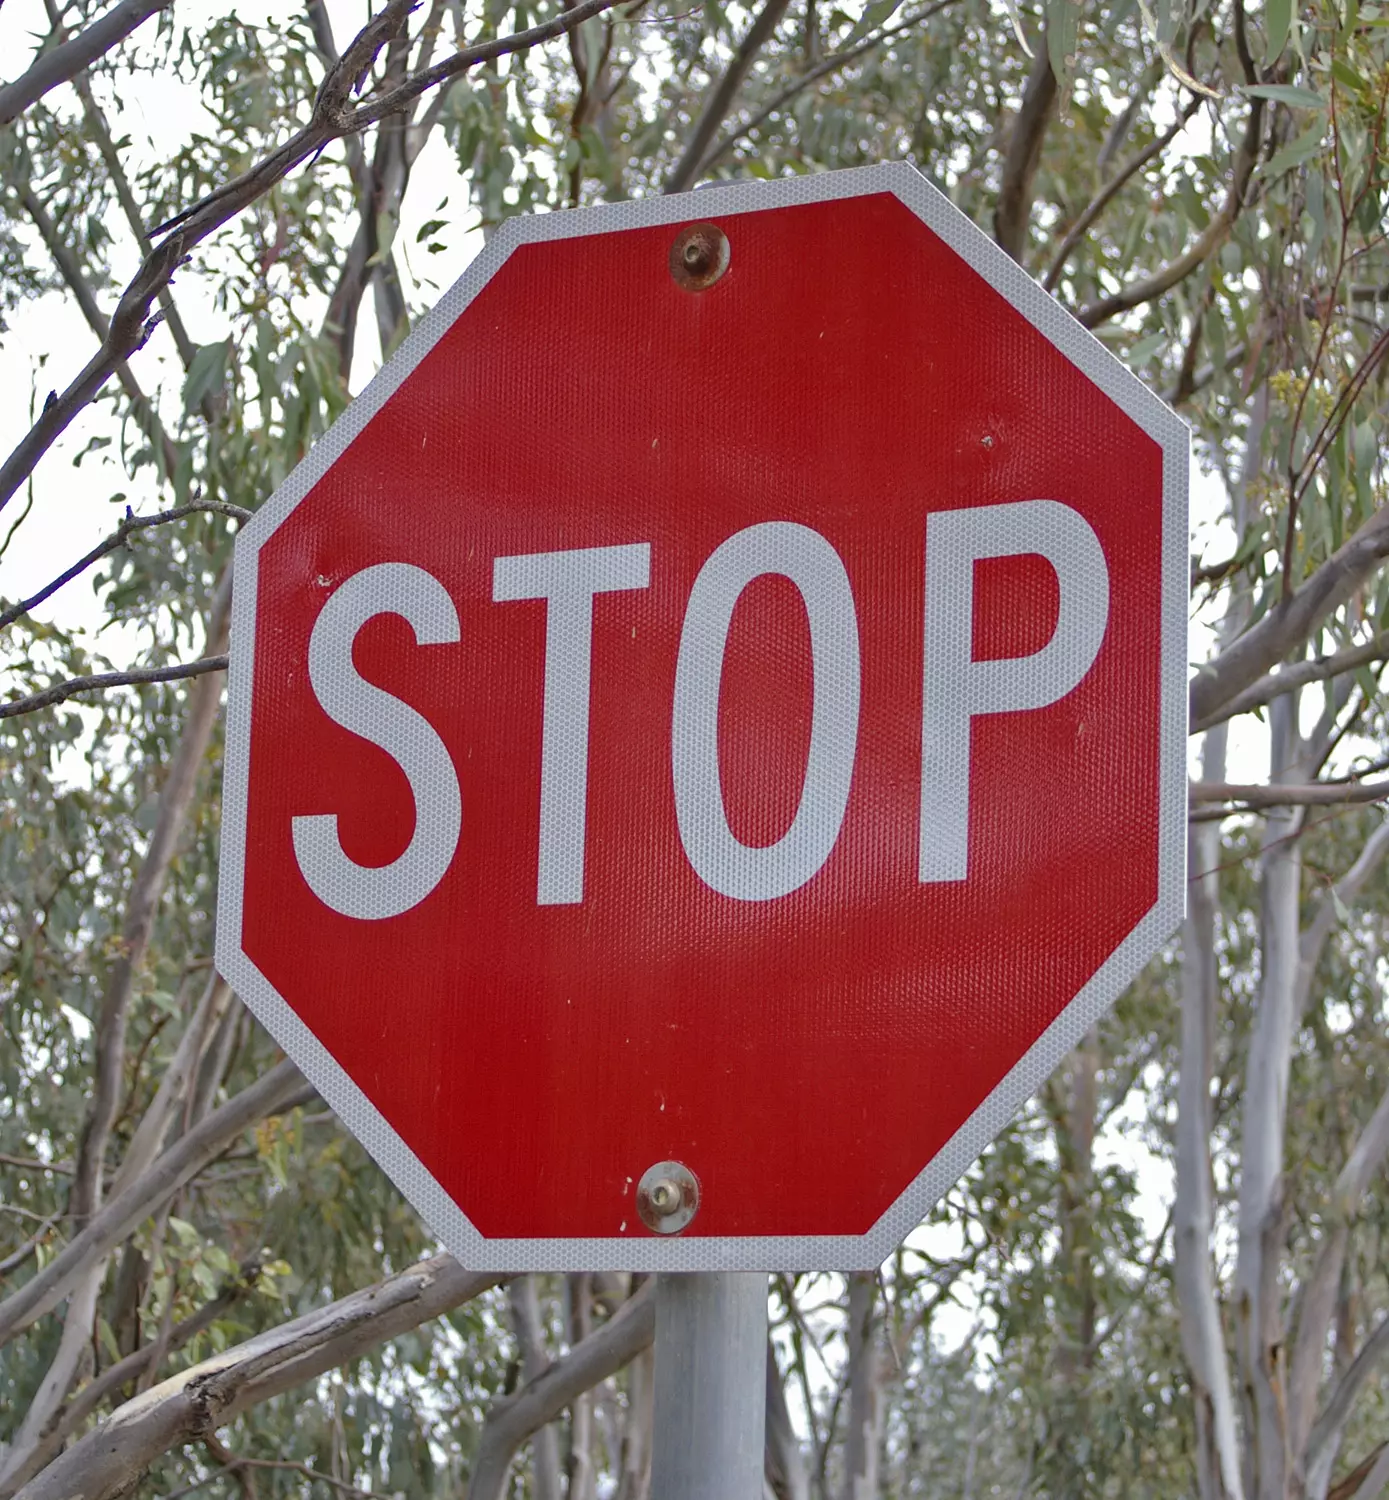 Can You Get a Ticket for Running a Stop Sign in a Parking Lot?